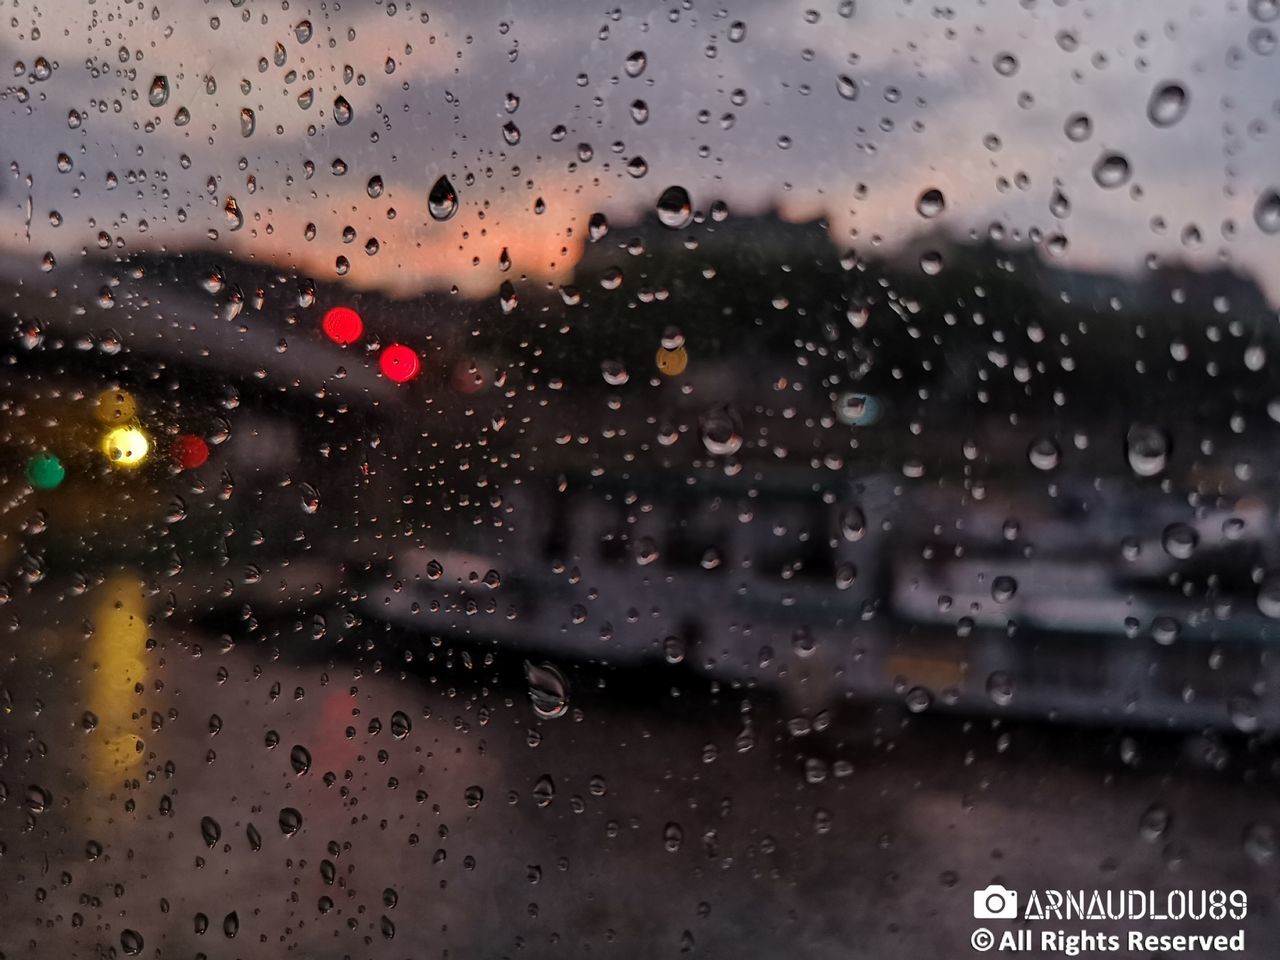 glass - material, wet, transparent, water, drop, window, rain, vehicle interior, mode of transportation, transportation, raindrop, car, rainy season, land vehicle, no people, nature, motor vehicle, indoors, glass